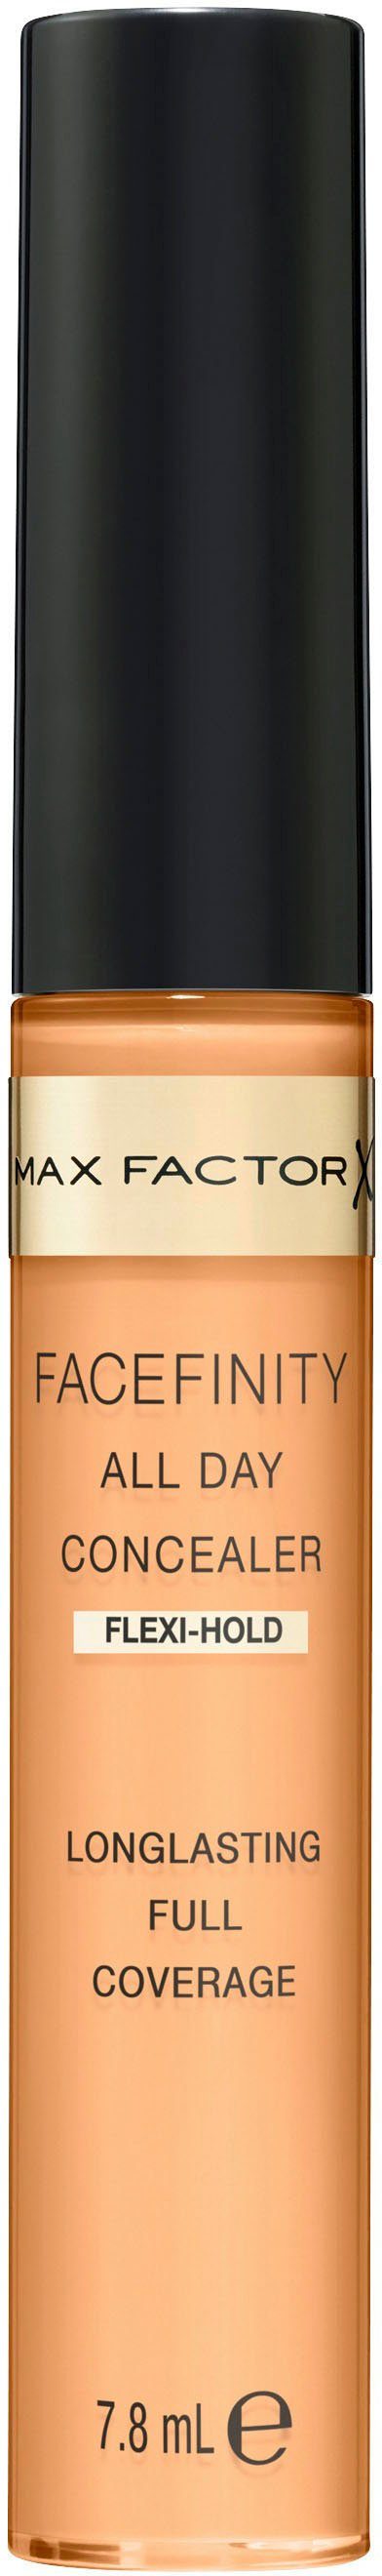 70 Flawless FACEFINITY All Day MAX FACTOR Concealer